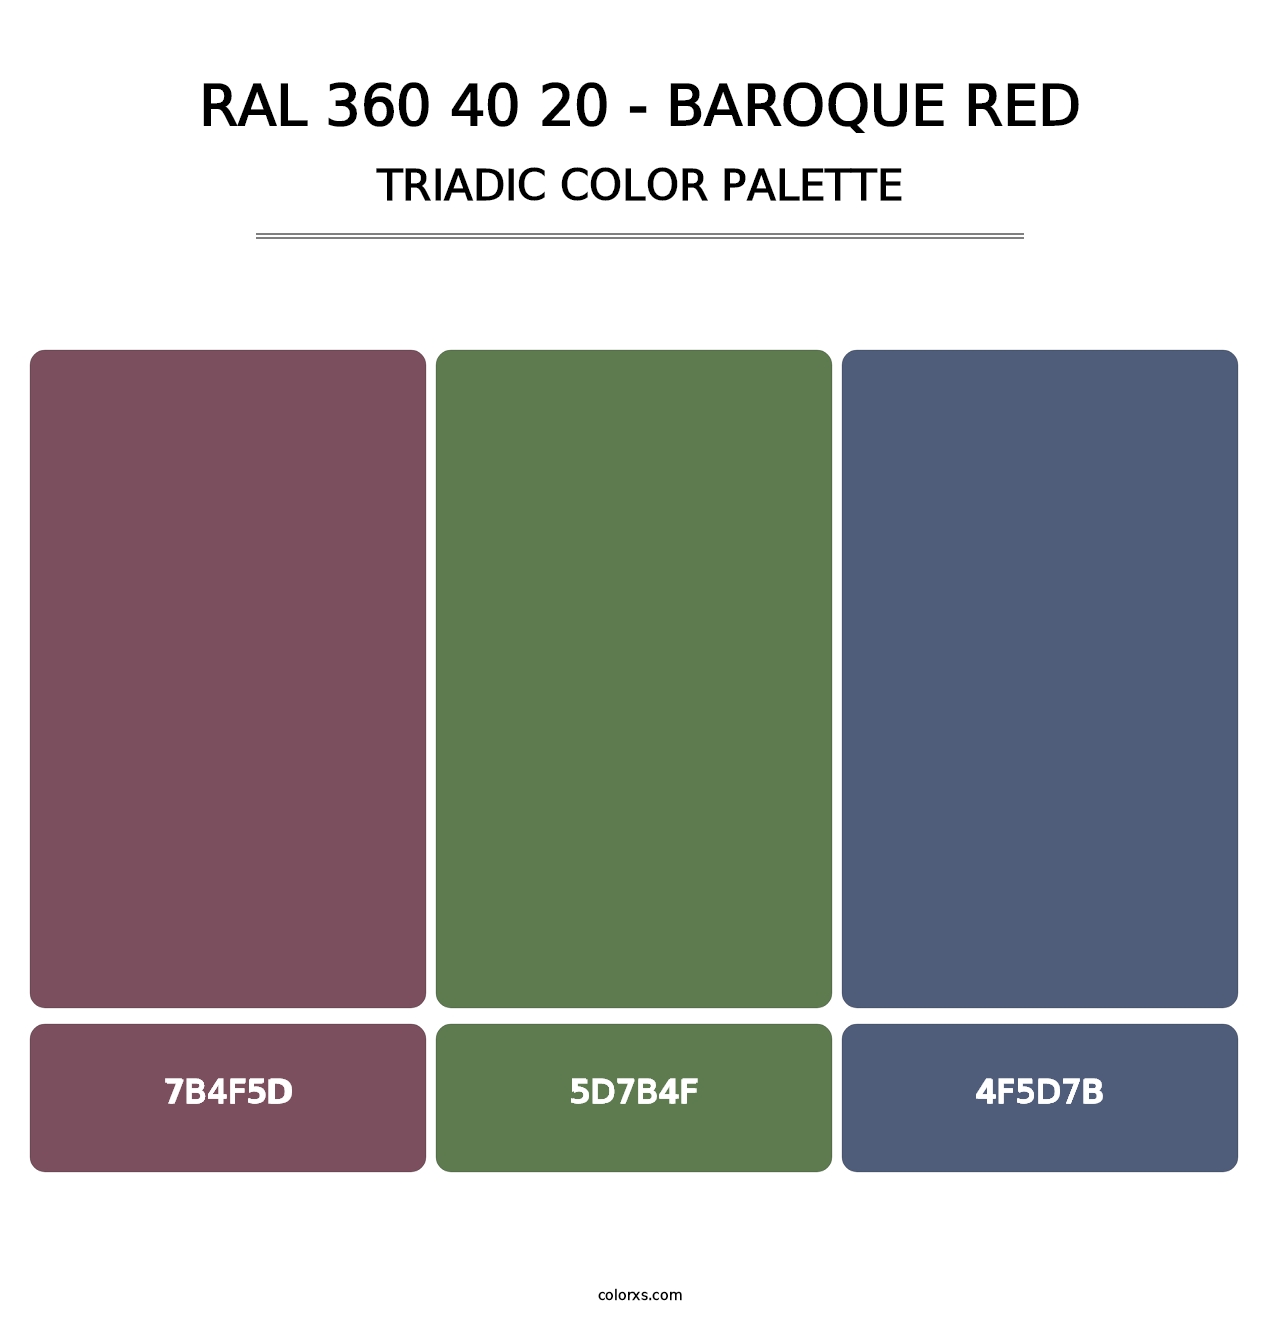 RAL 360 40 20 - Baroque Red - Triadic Color Palette